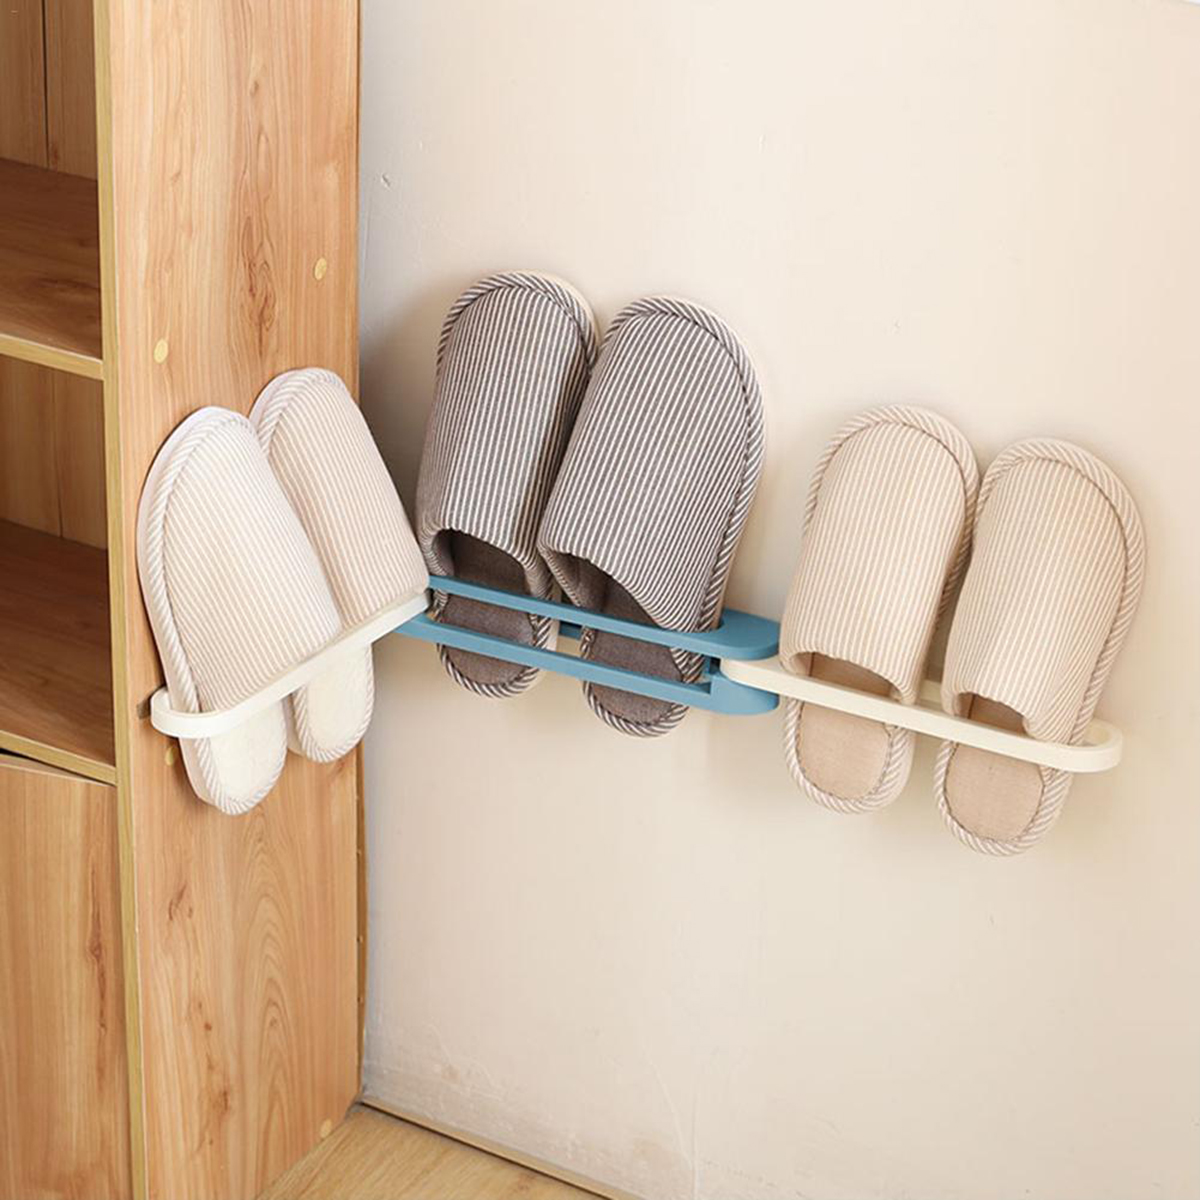 3 in 1 Home Wall-Mounted Shoes Shelf Racks Slippers Shoes Holder Shoes Storage Rack Shoes Organizer